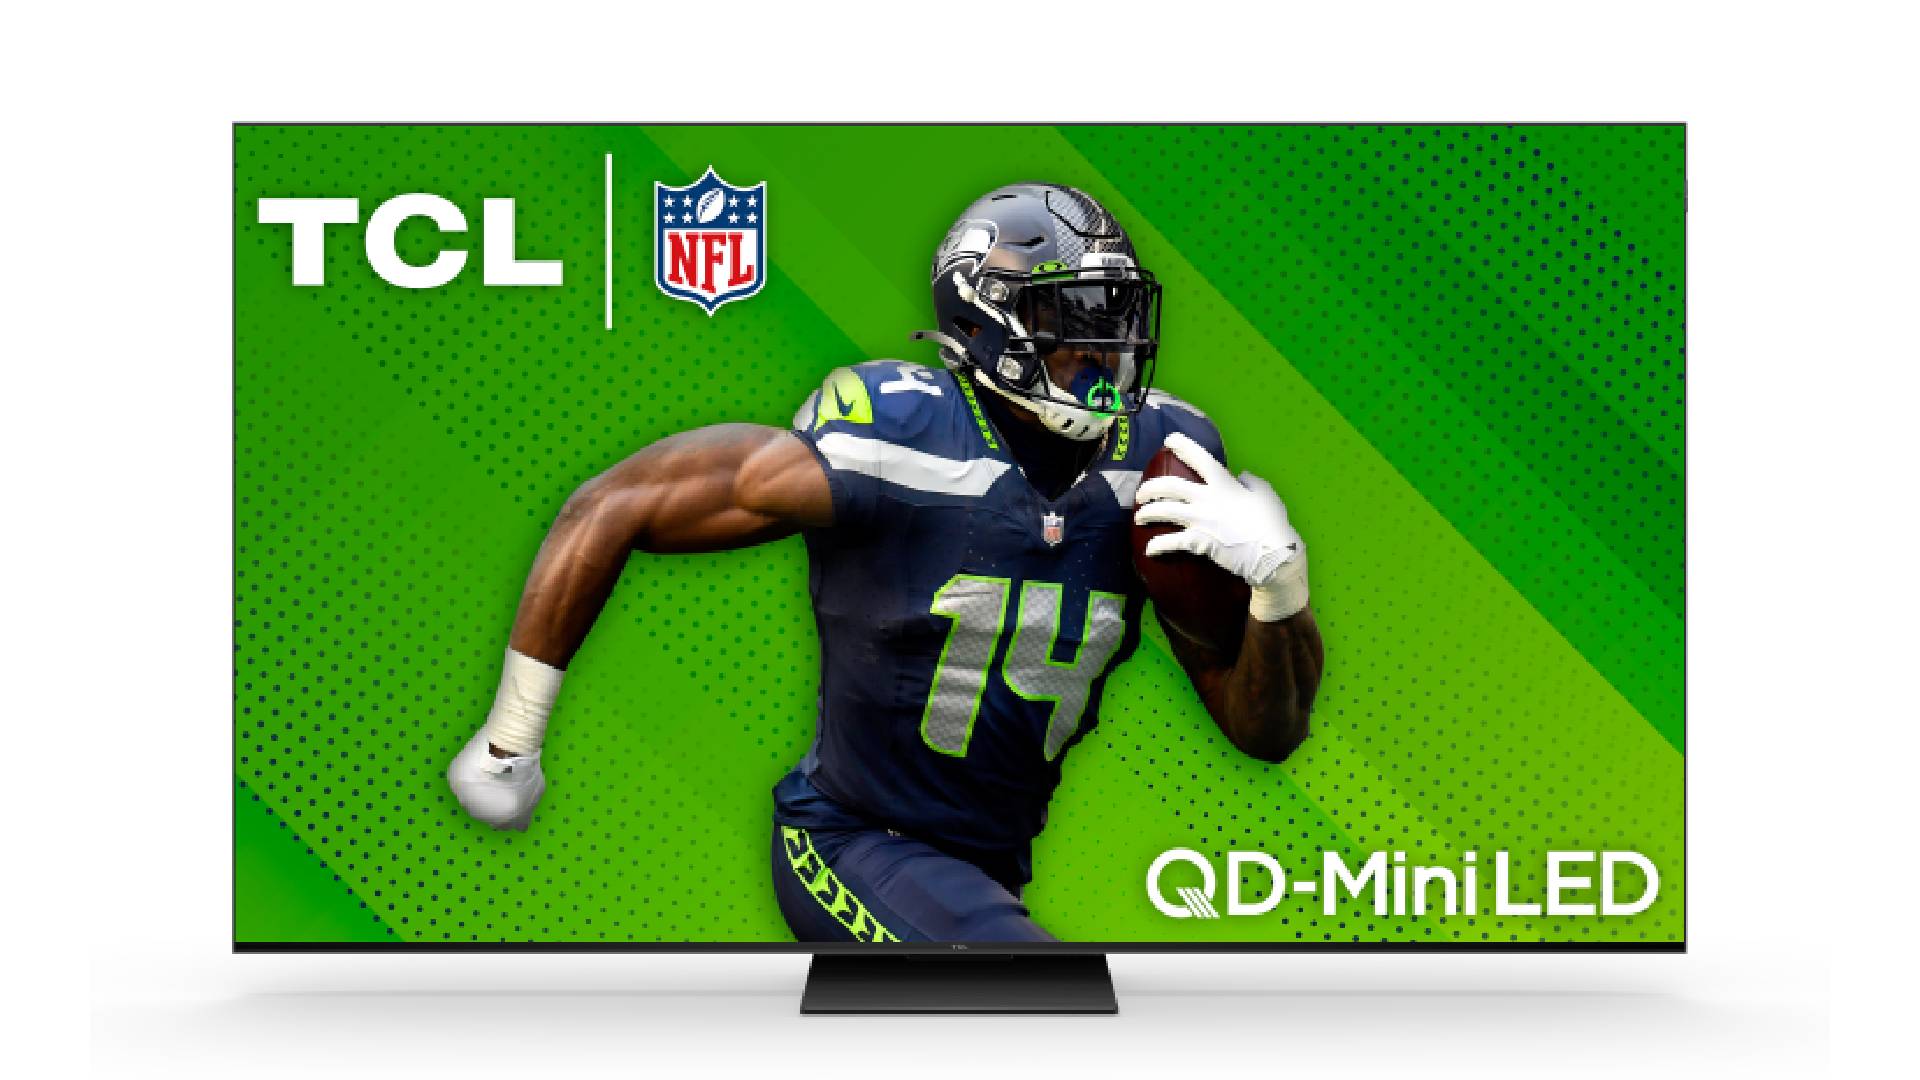 TCL wows CES with a 115-inch mini-LED TV with 20,000 dimming zones